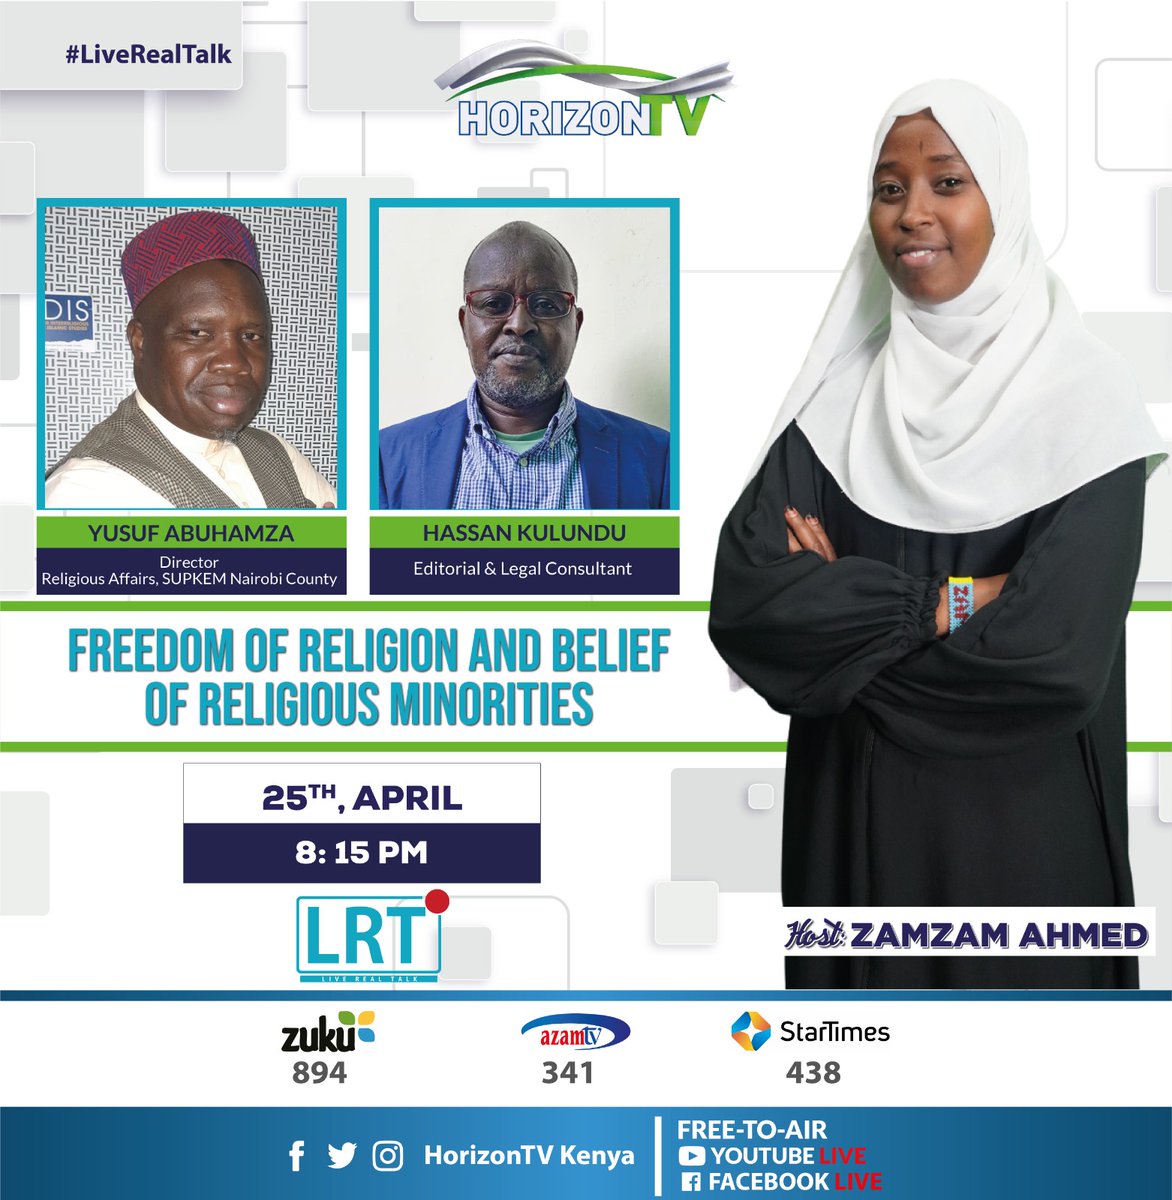 Join us Today at 8:15pm on HorizonTV as we host Yusuf Hamza, Director Religious affairs, SUPKEM Nairobi County and Hassan Kalungu Editorial & Legal Consultant as they Discuss Freedom of Religion and belief of Religious Minorities. Don't miss this insightful conversation.